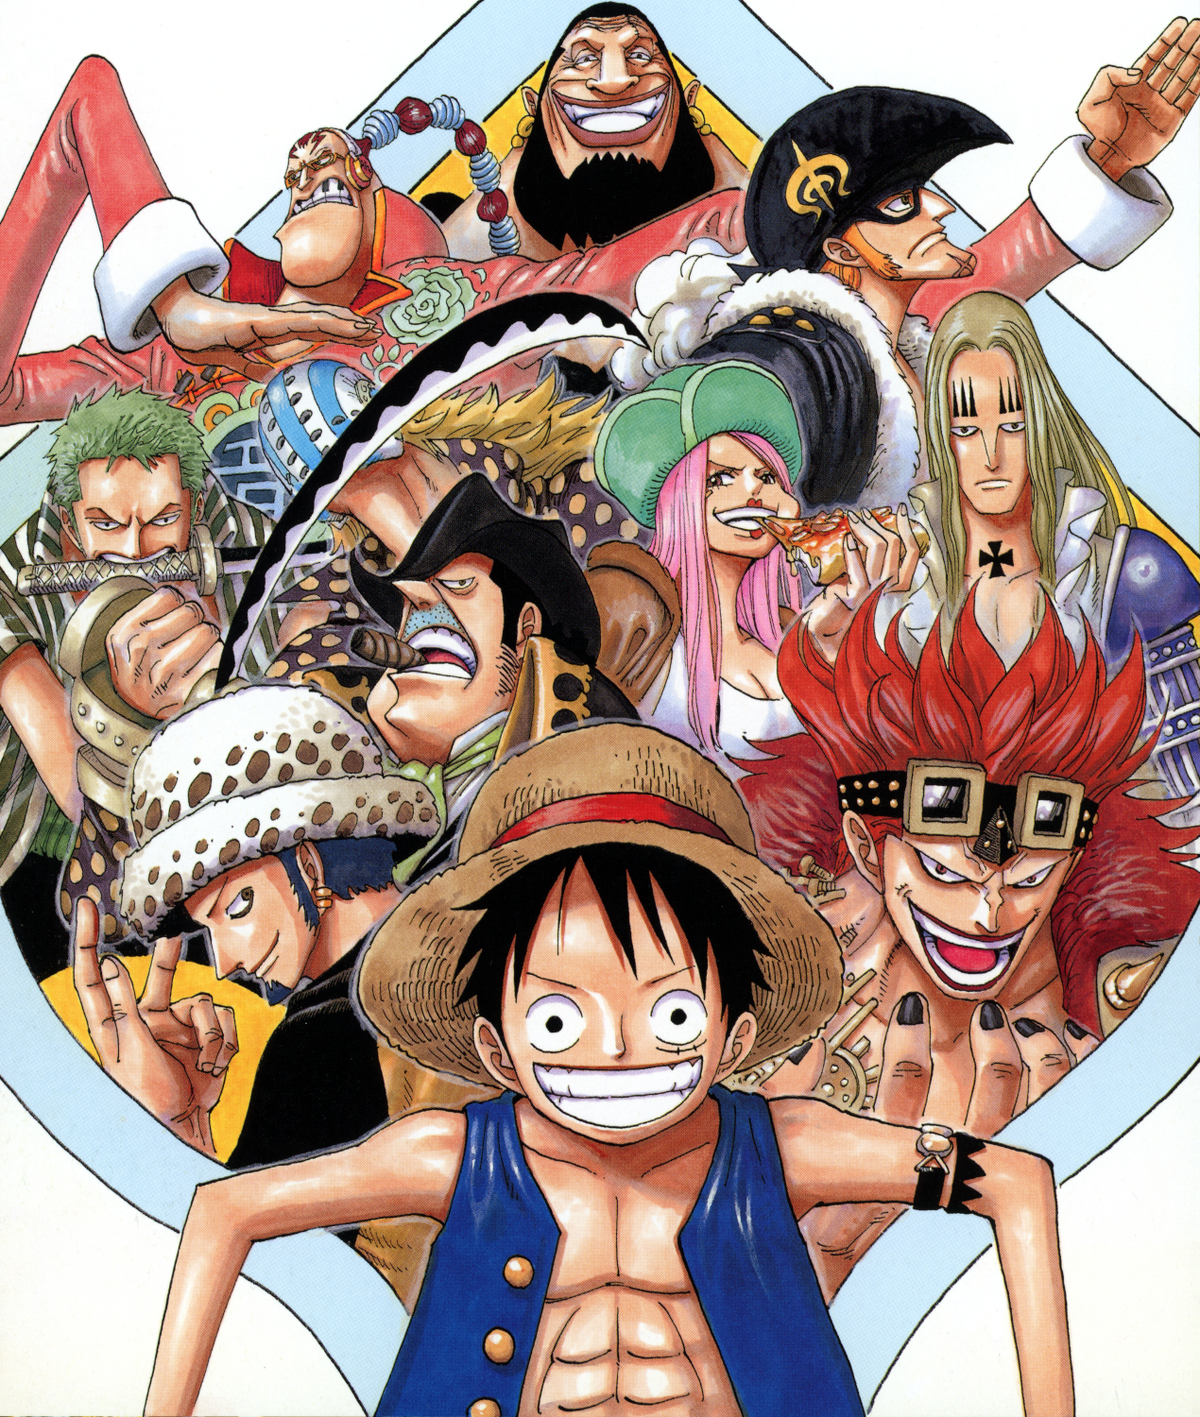 One Piece Zou  One piece manga, One piece images, The incredibles